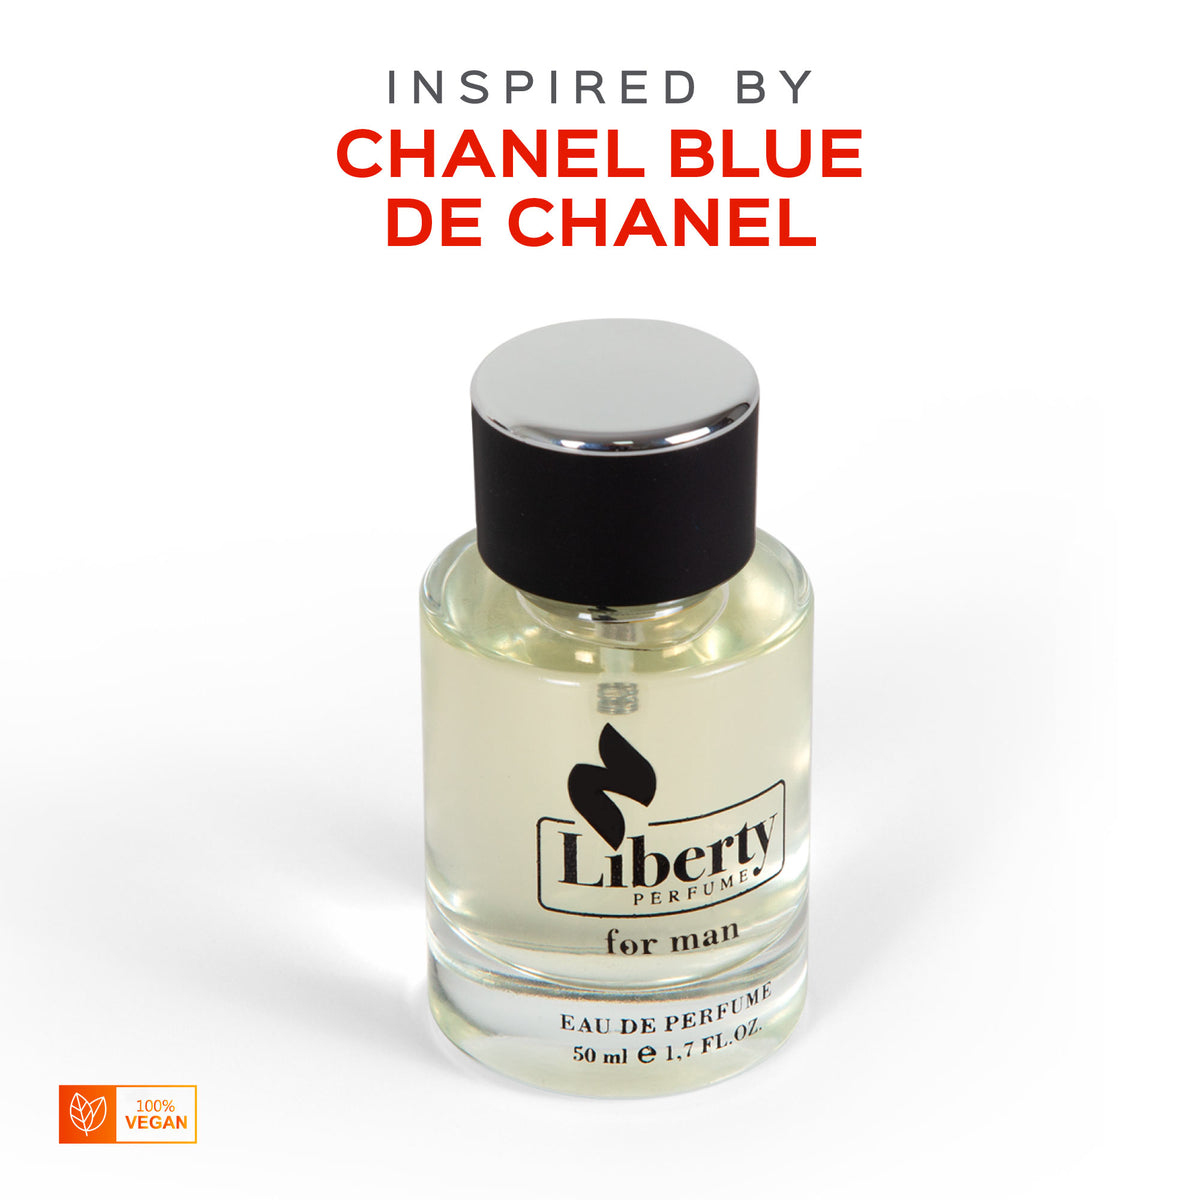 M20 Blue-C for Men Perfume - Inspired by Chanel Blue De Chanel -$39.99 –  Liberty Perfume